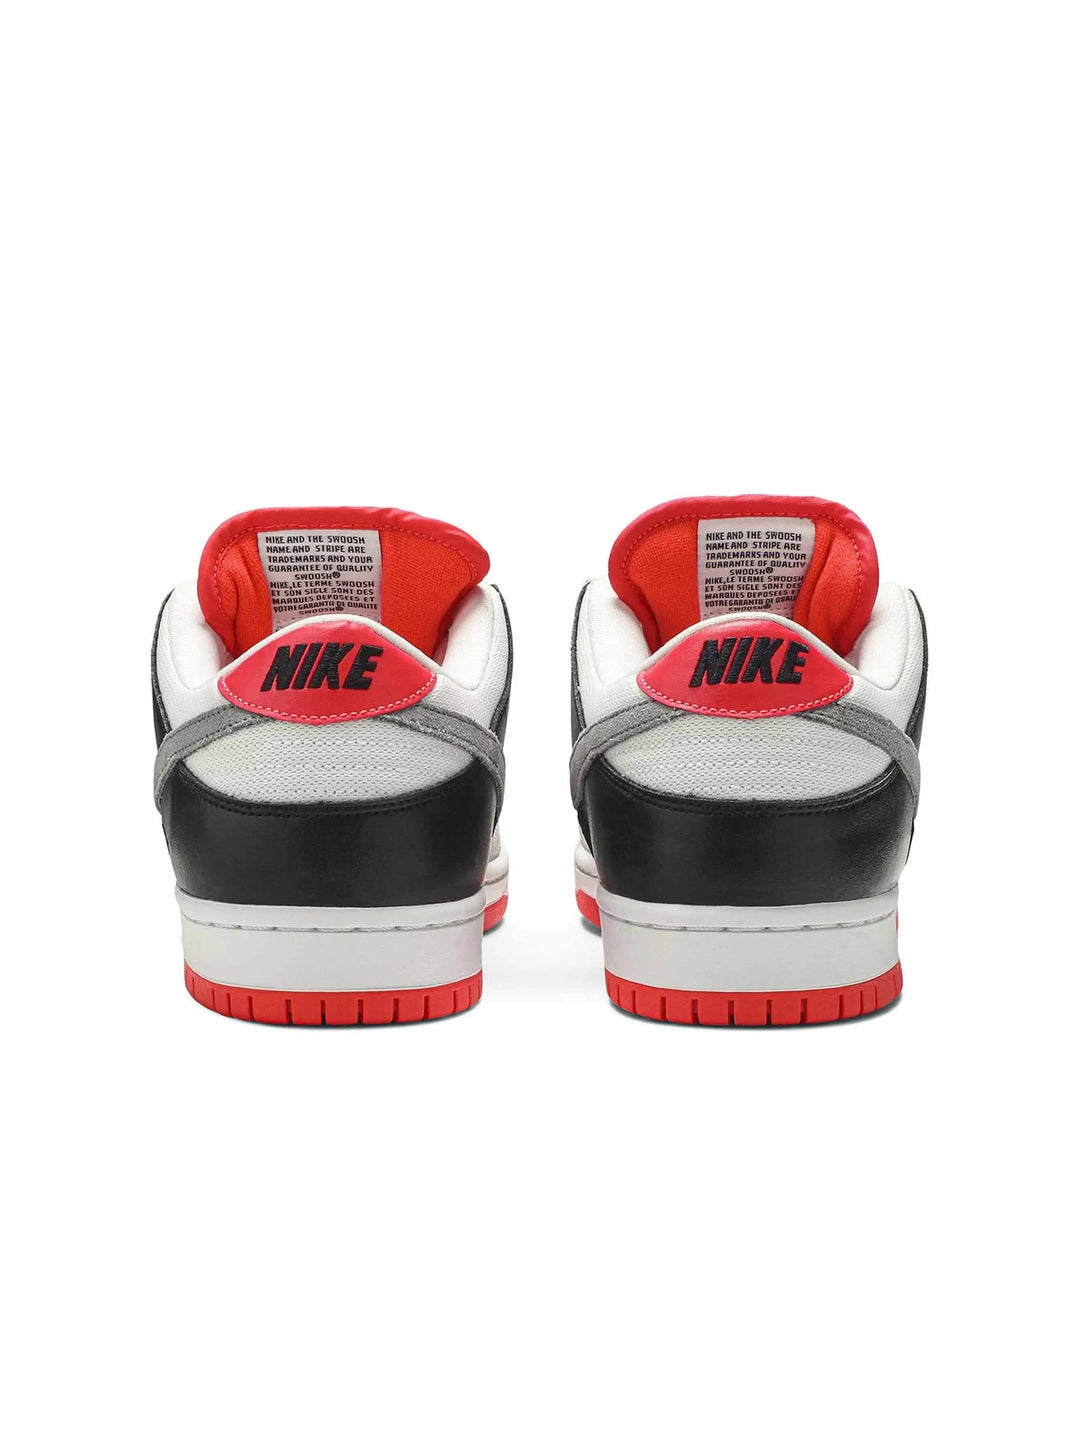 Nike SB Dunk Low Infrared Orange Label in Auckland, New Zealand - Shop name